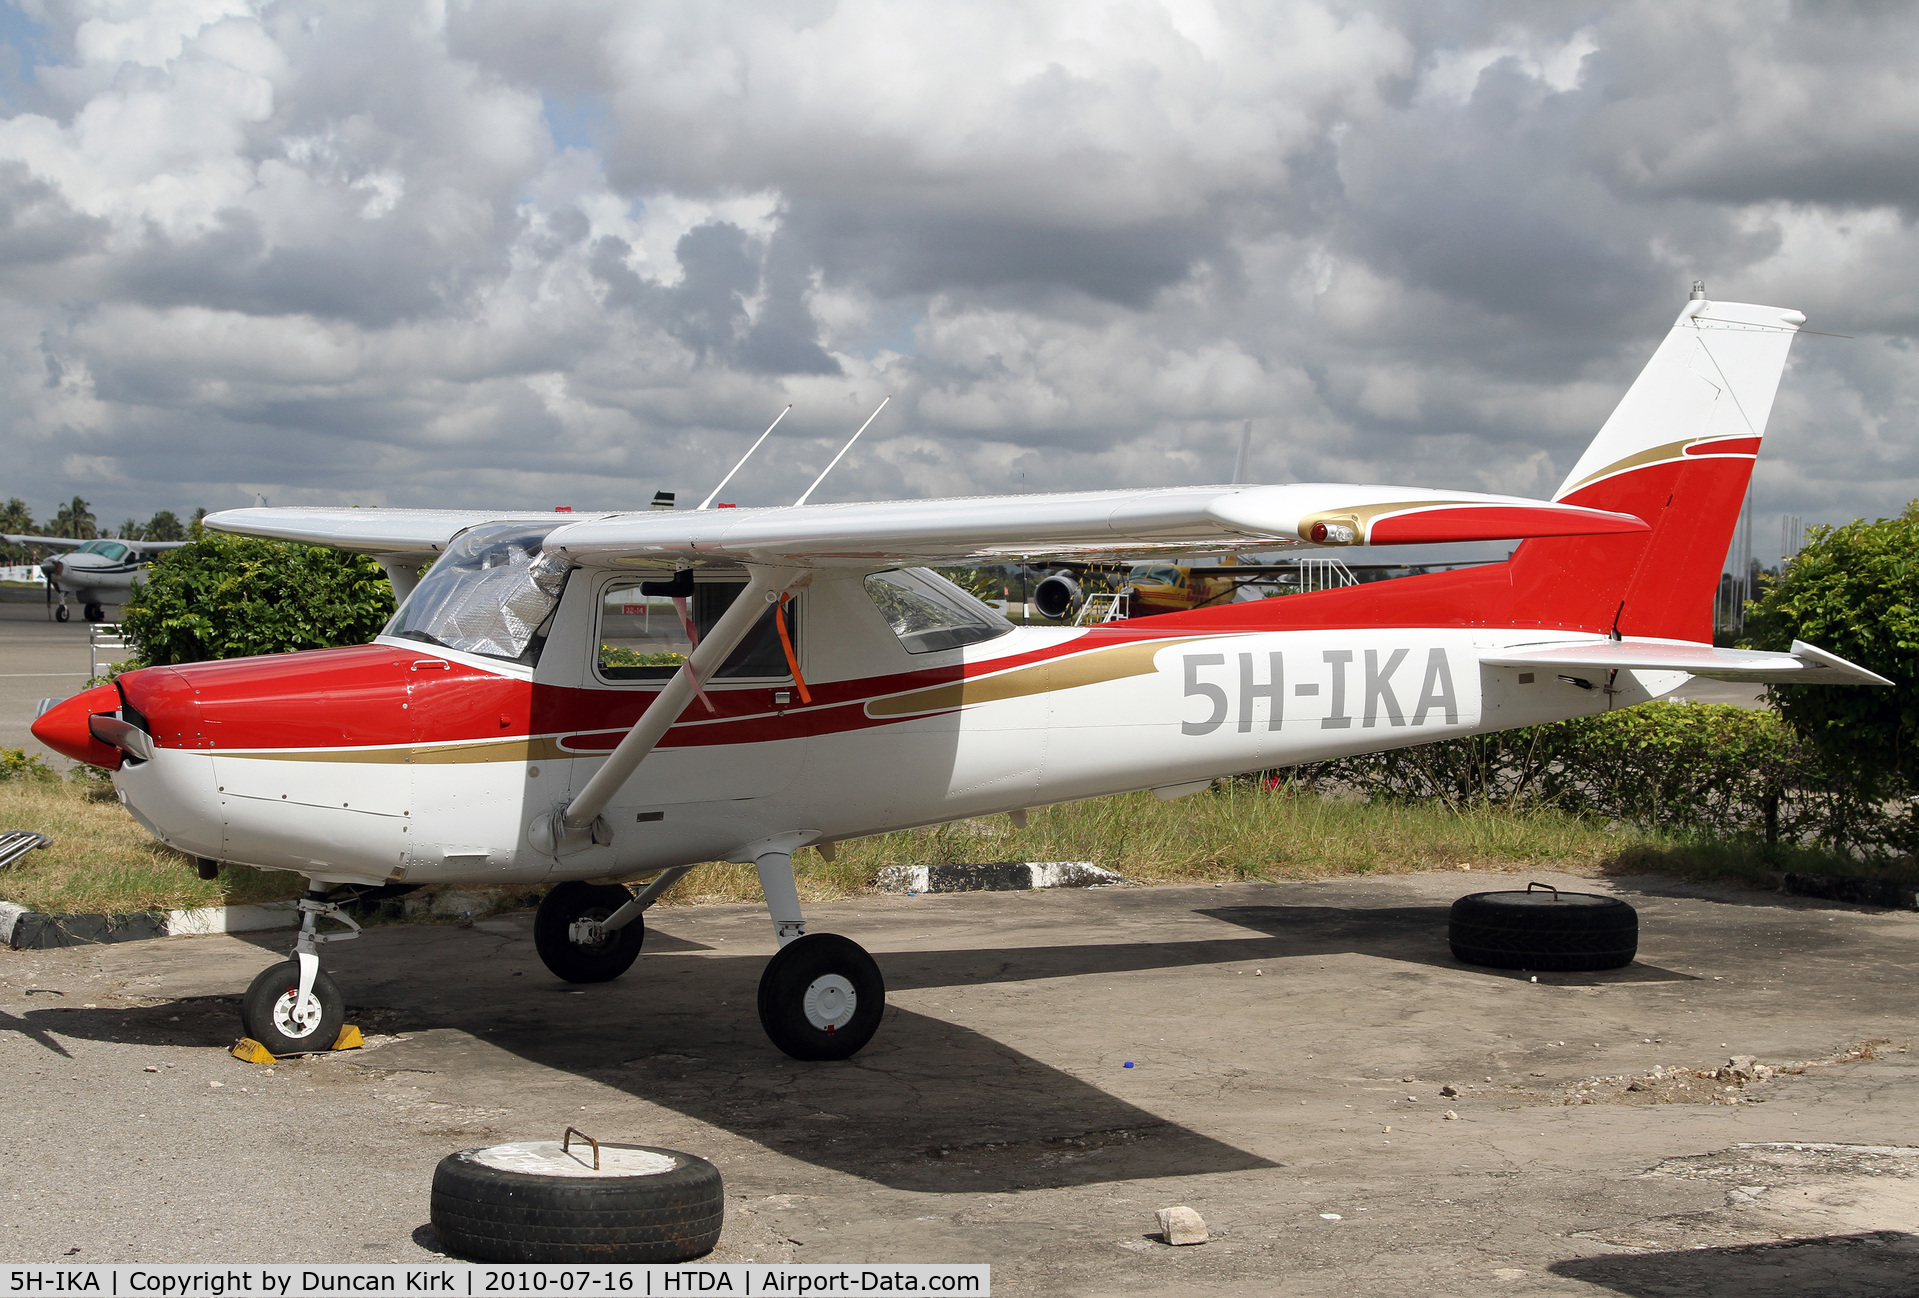 5H-IKA, 1978 Cessna 152 C/N 15281794, It's getting hot out on the ramp!!!